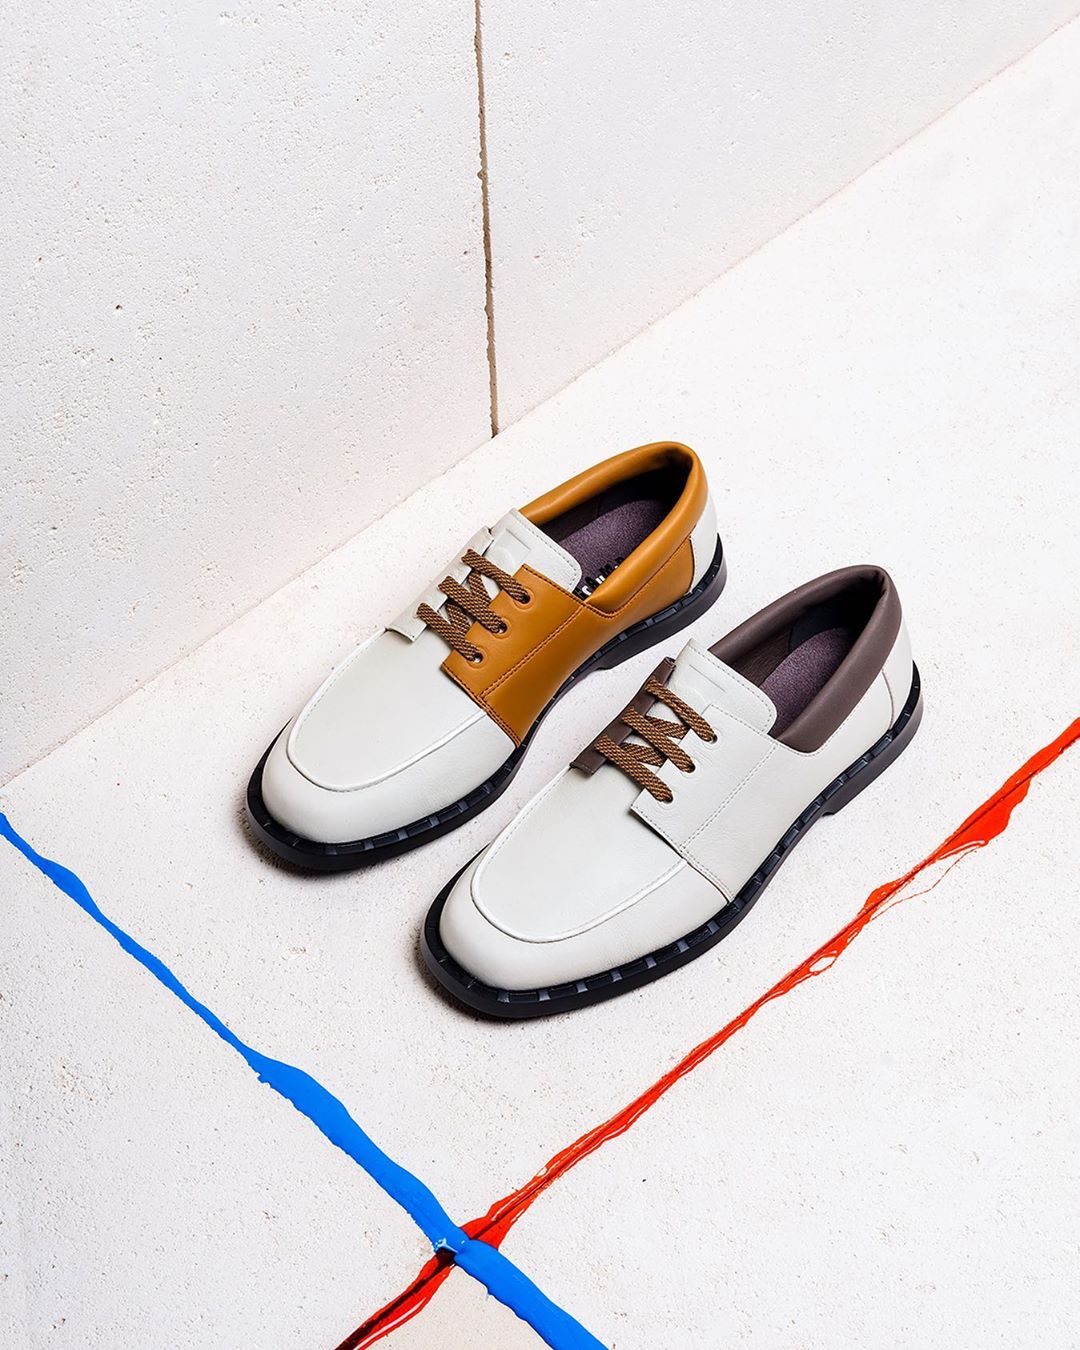 Camper - Discover more TWINS styles from our #fw2020 #campershoes #newcollection